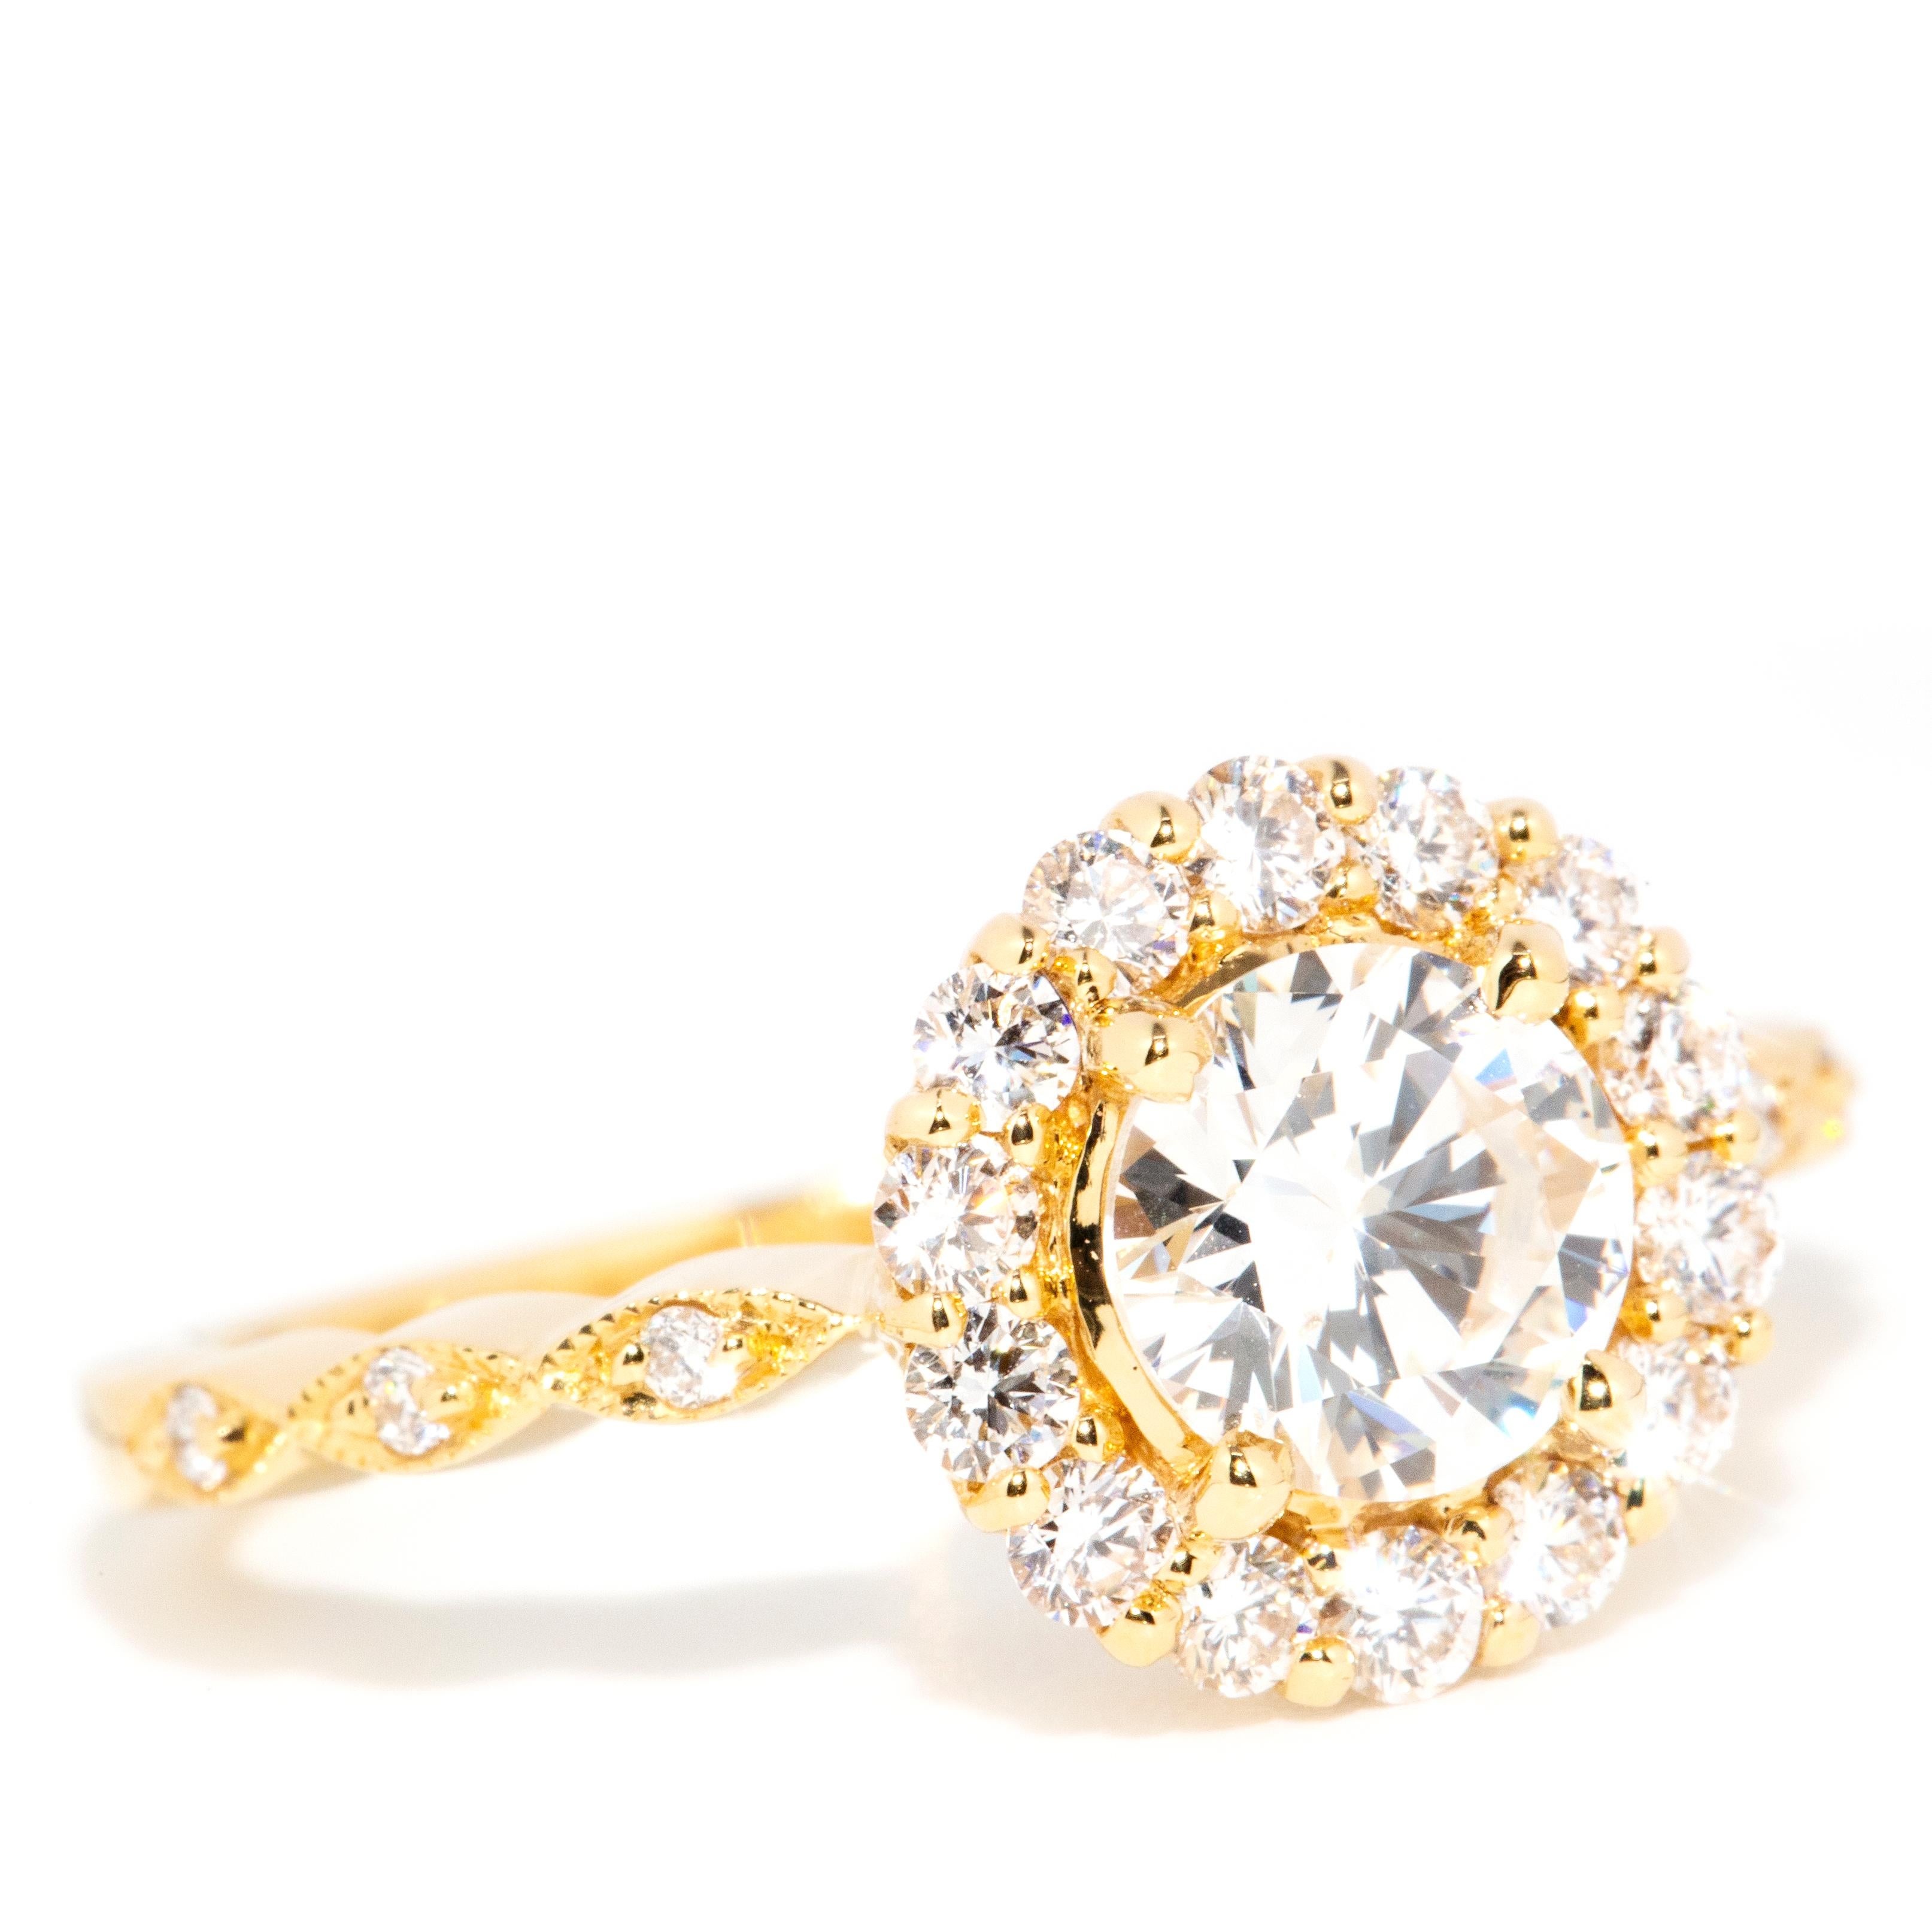 Contemporary GIA Certified 1.01 Carat Diamond Halo Cluster Ring in 18 Carat Yellow Gold For Sale